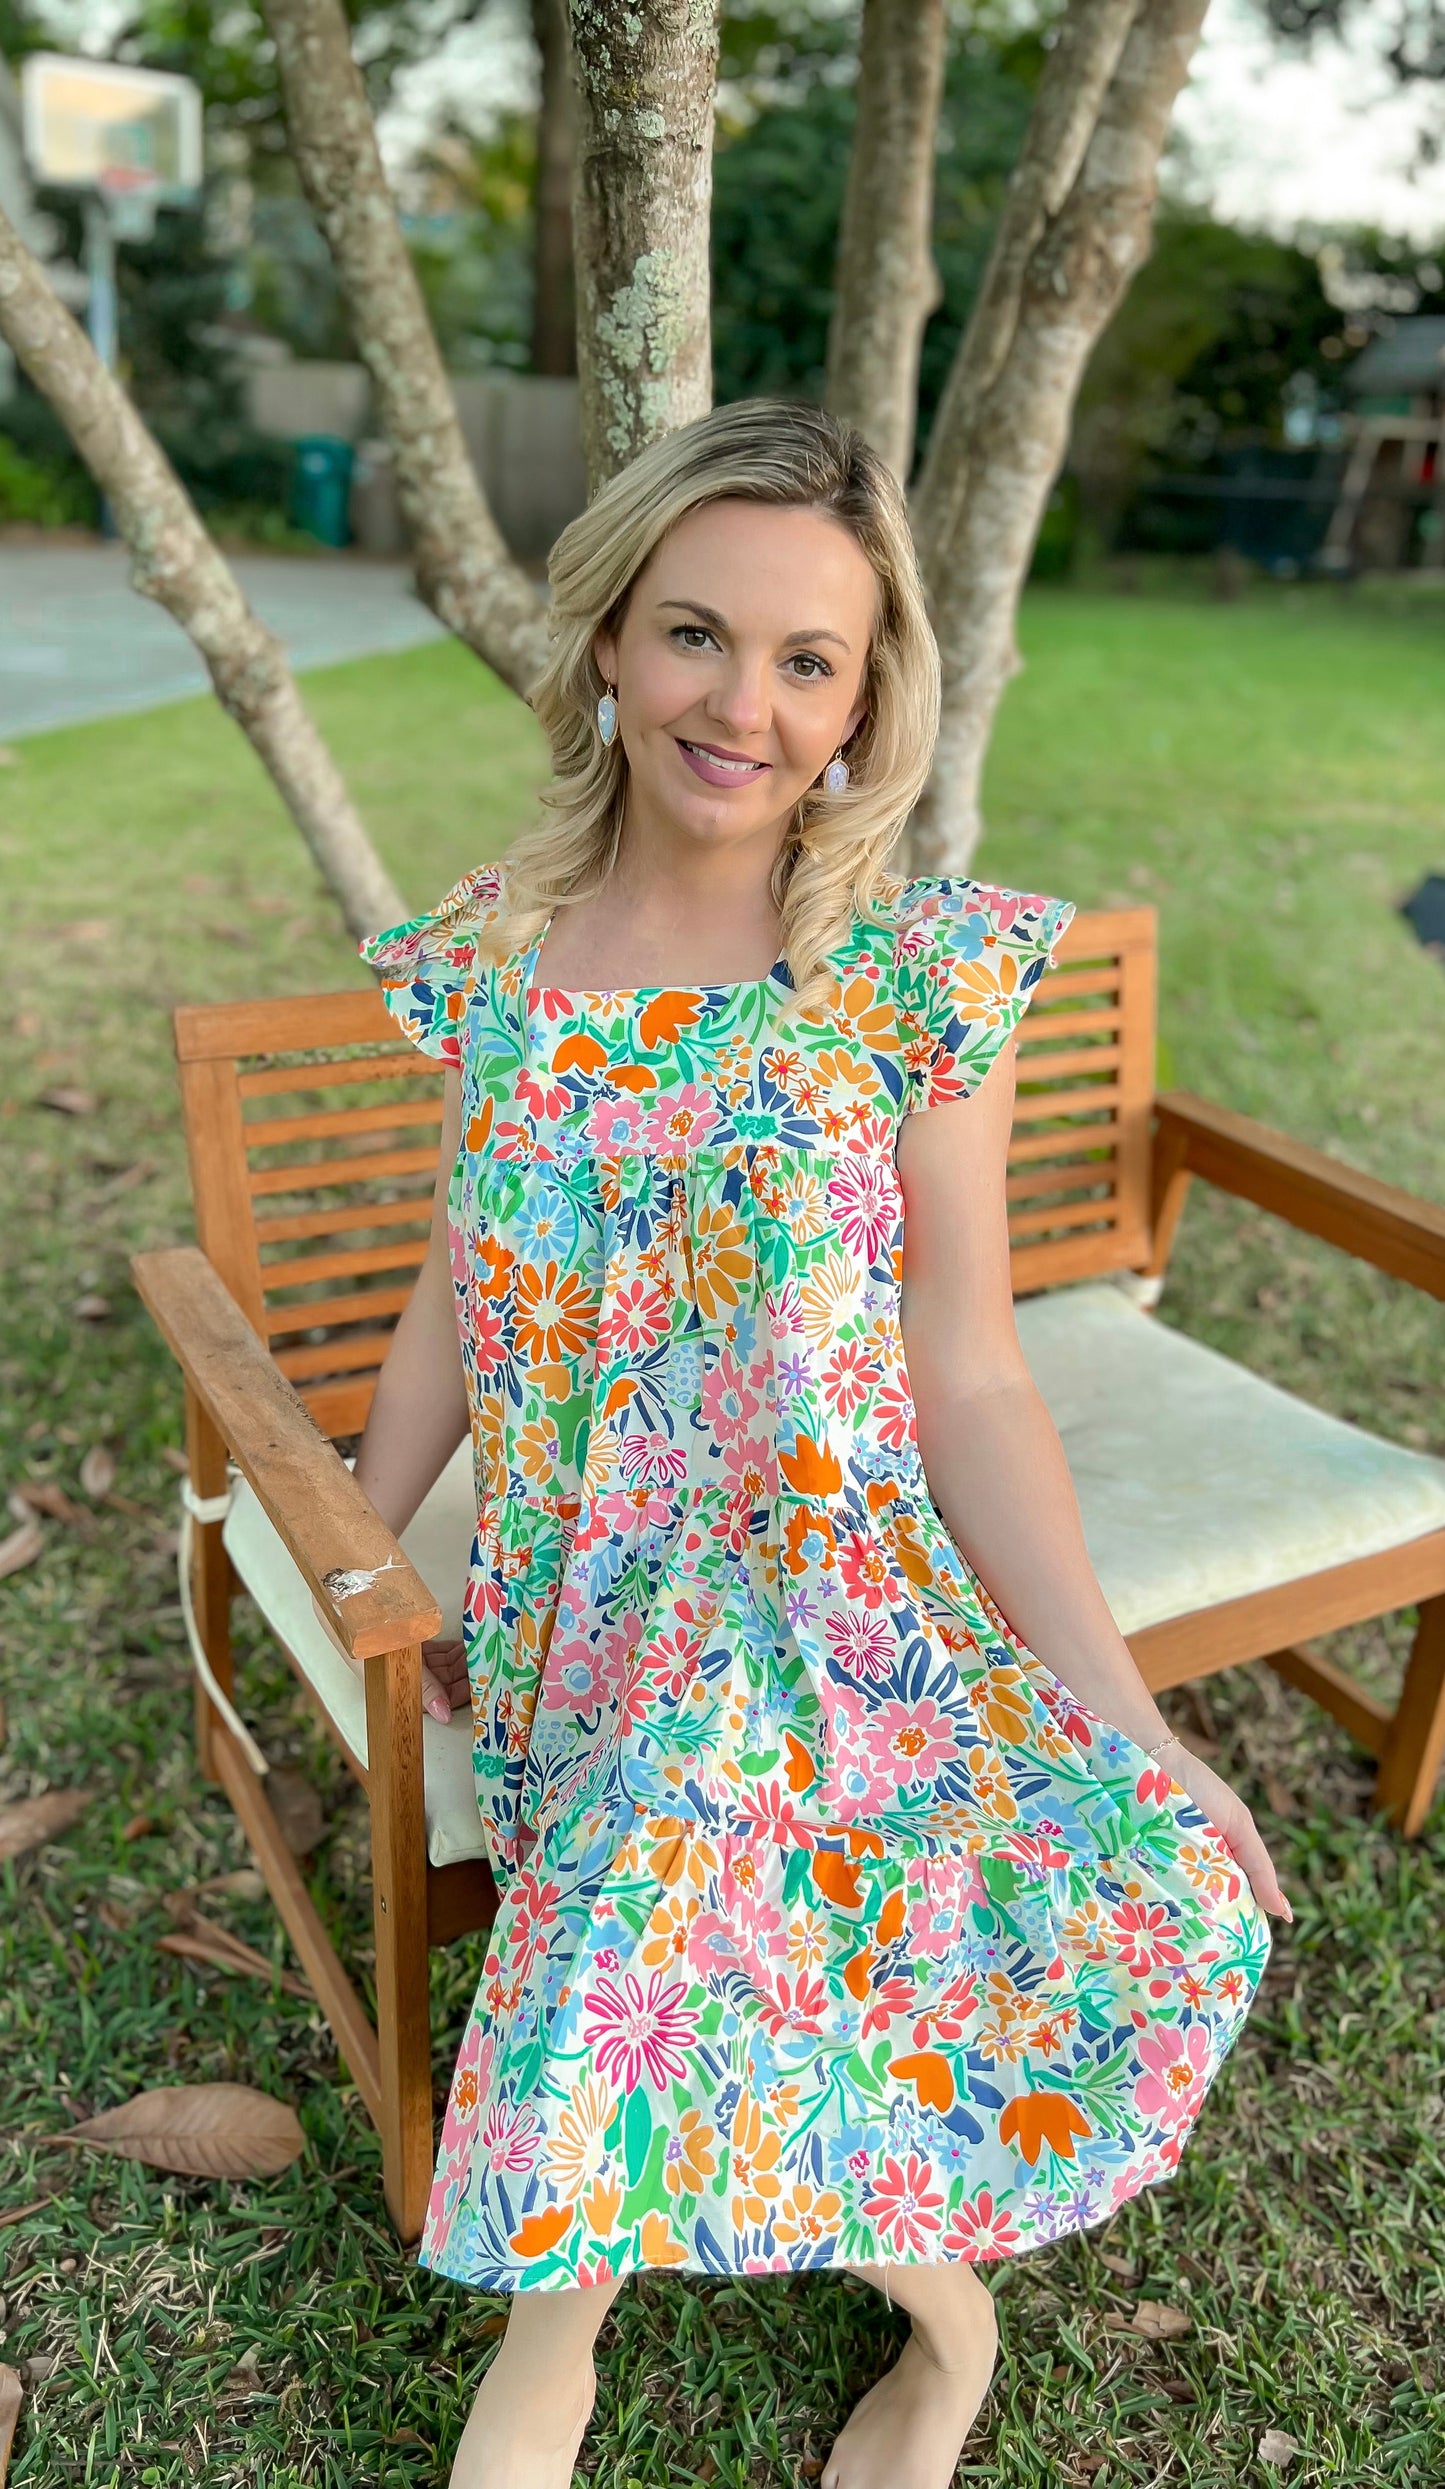 All Eyes on Me Floral Dress